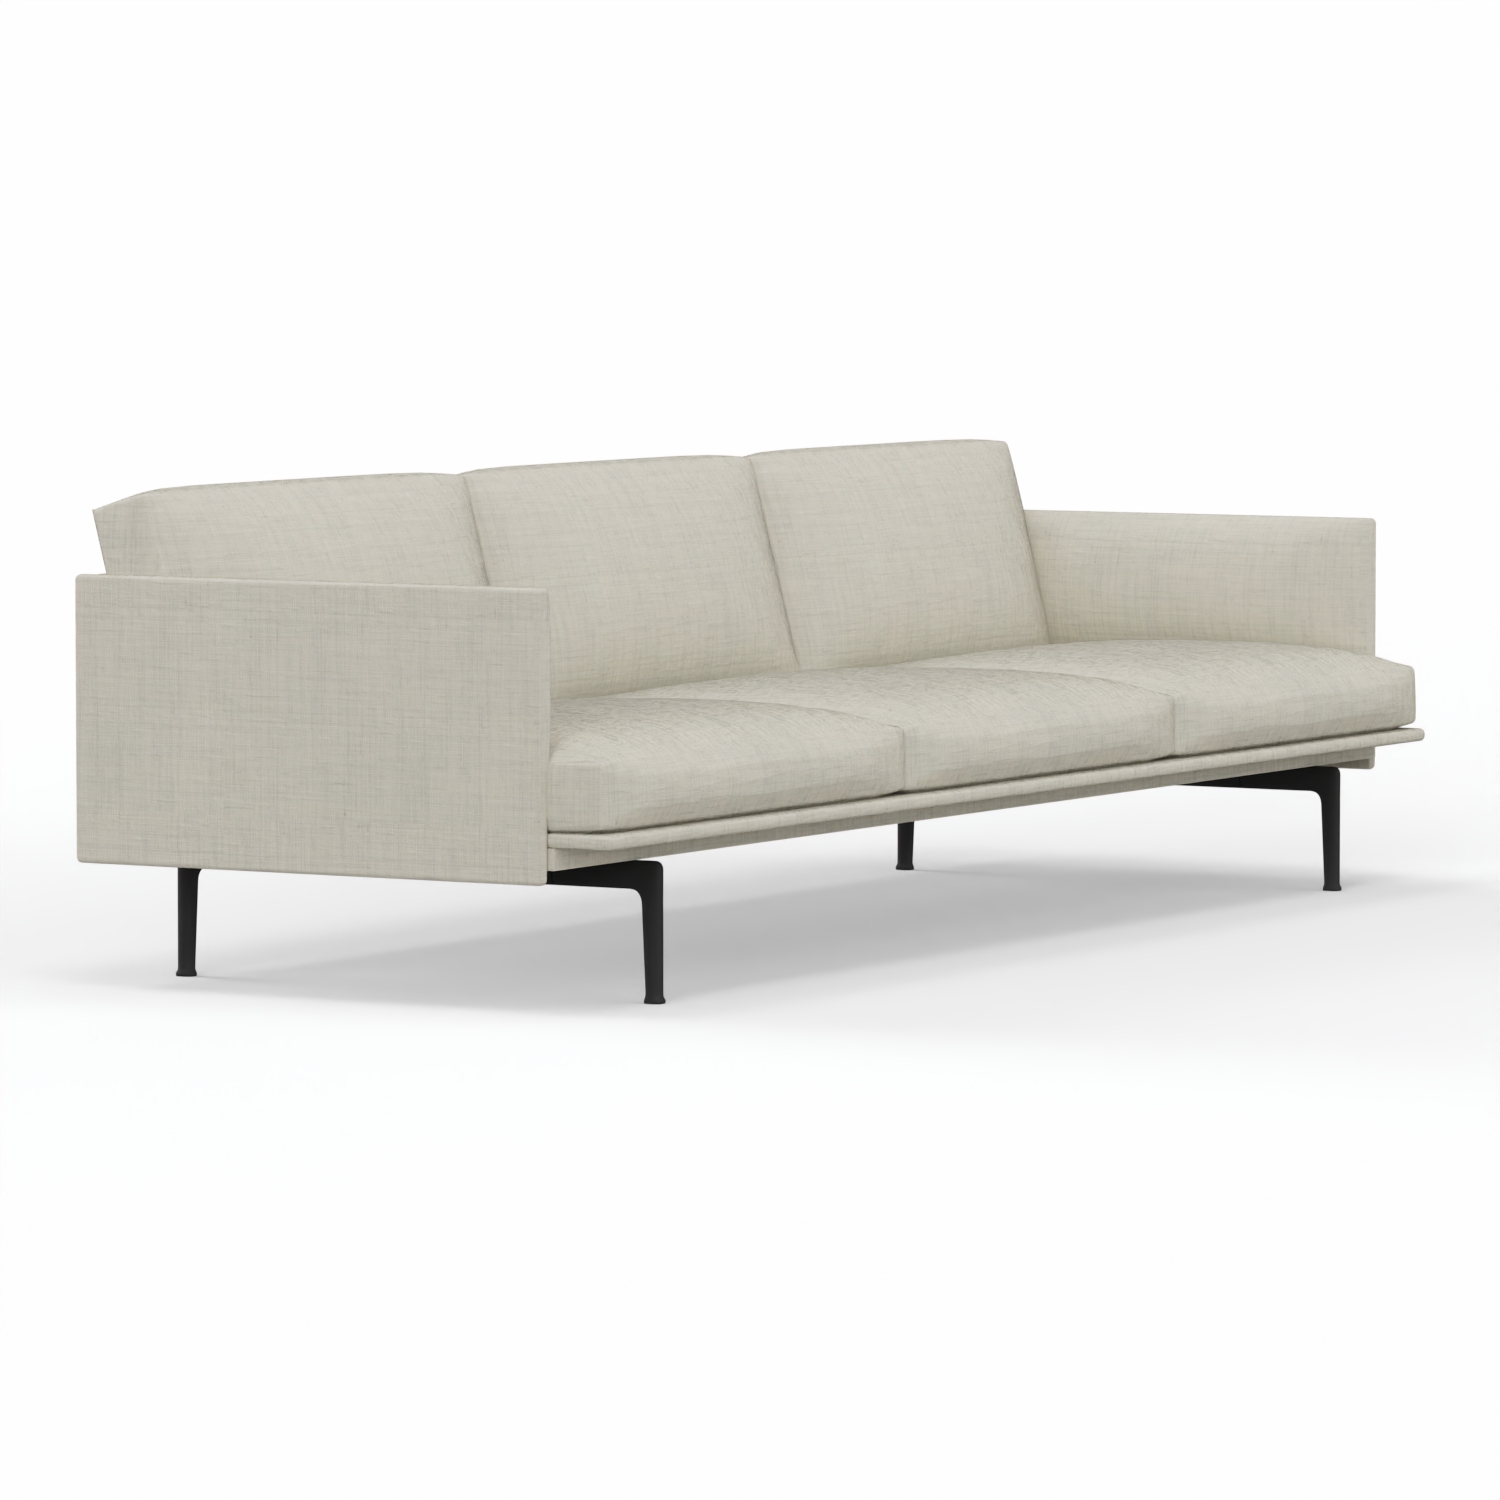 Outline Sofa / 3 1/2-SEATER 28105-113